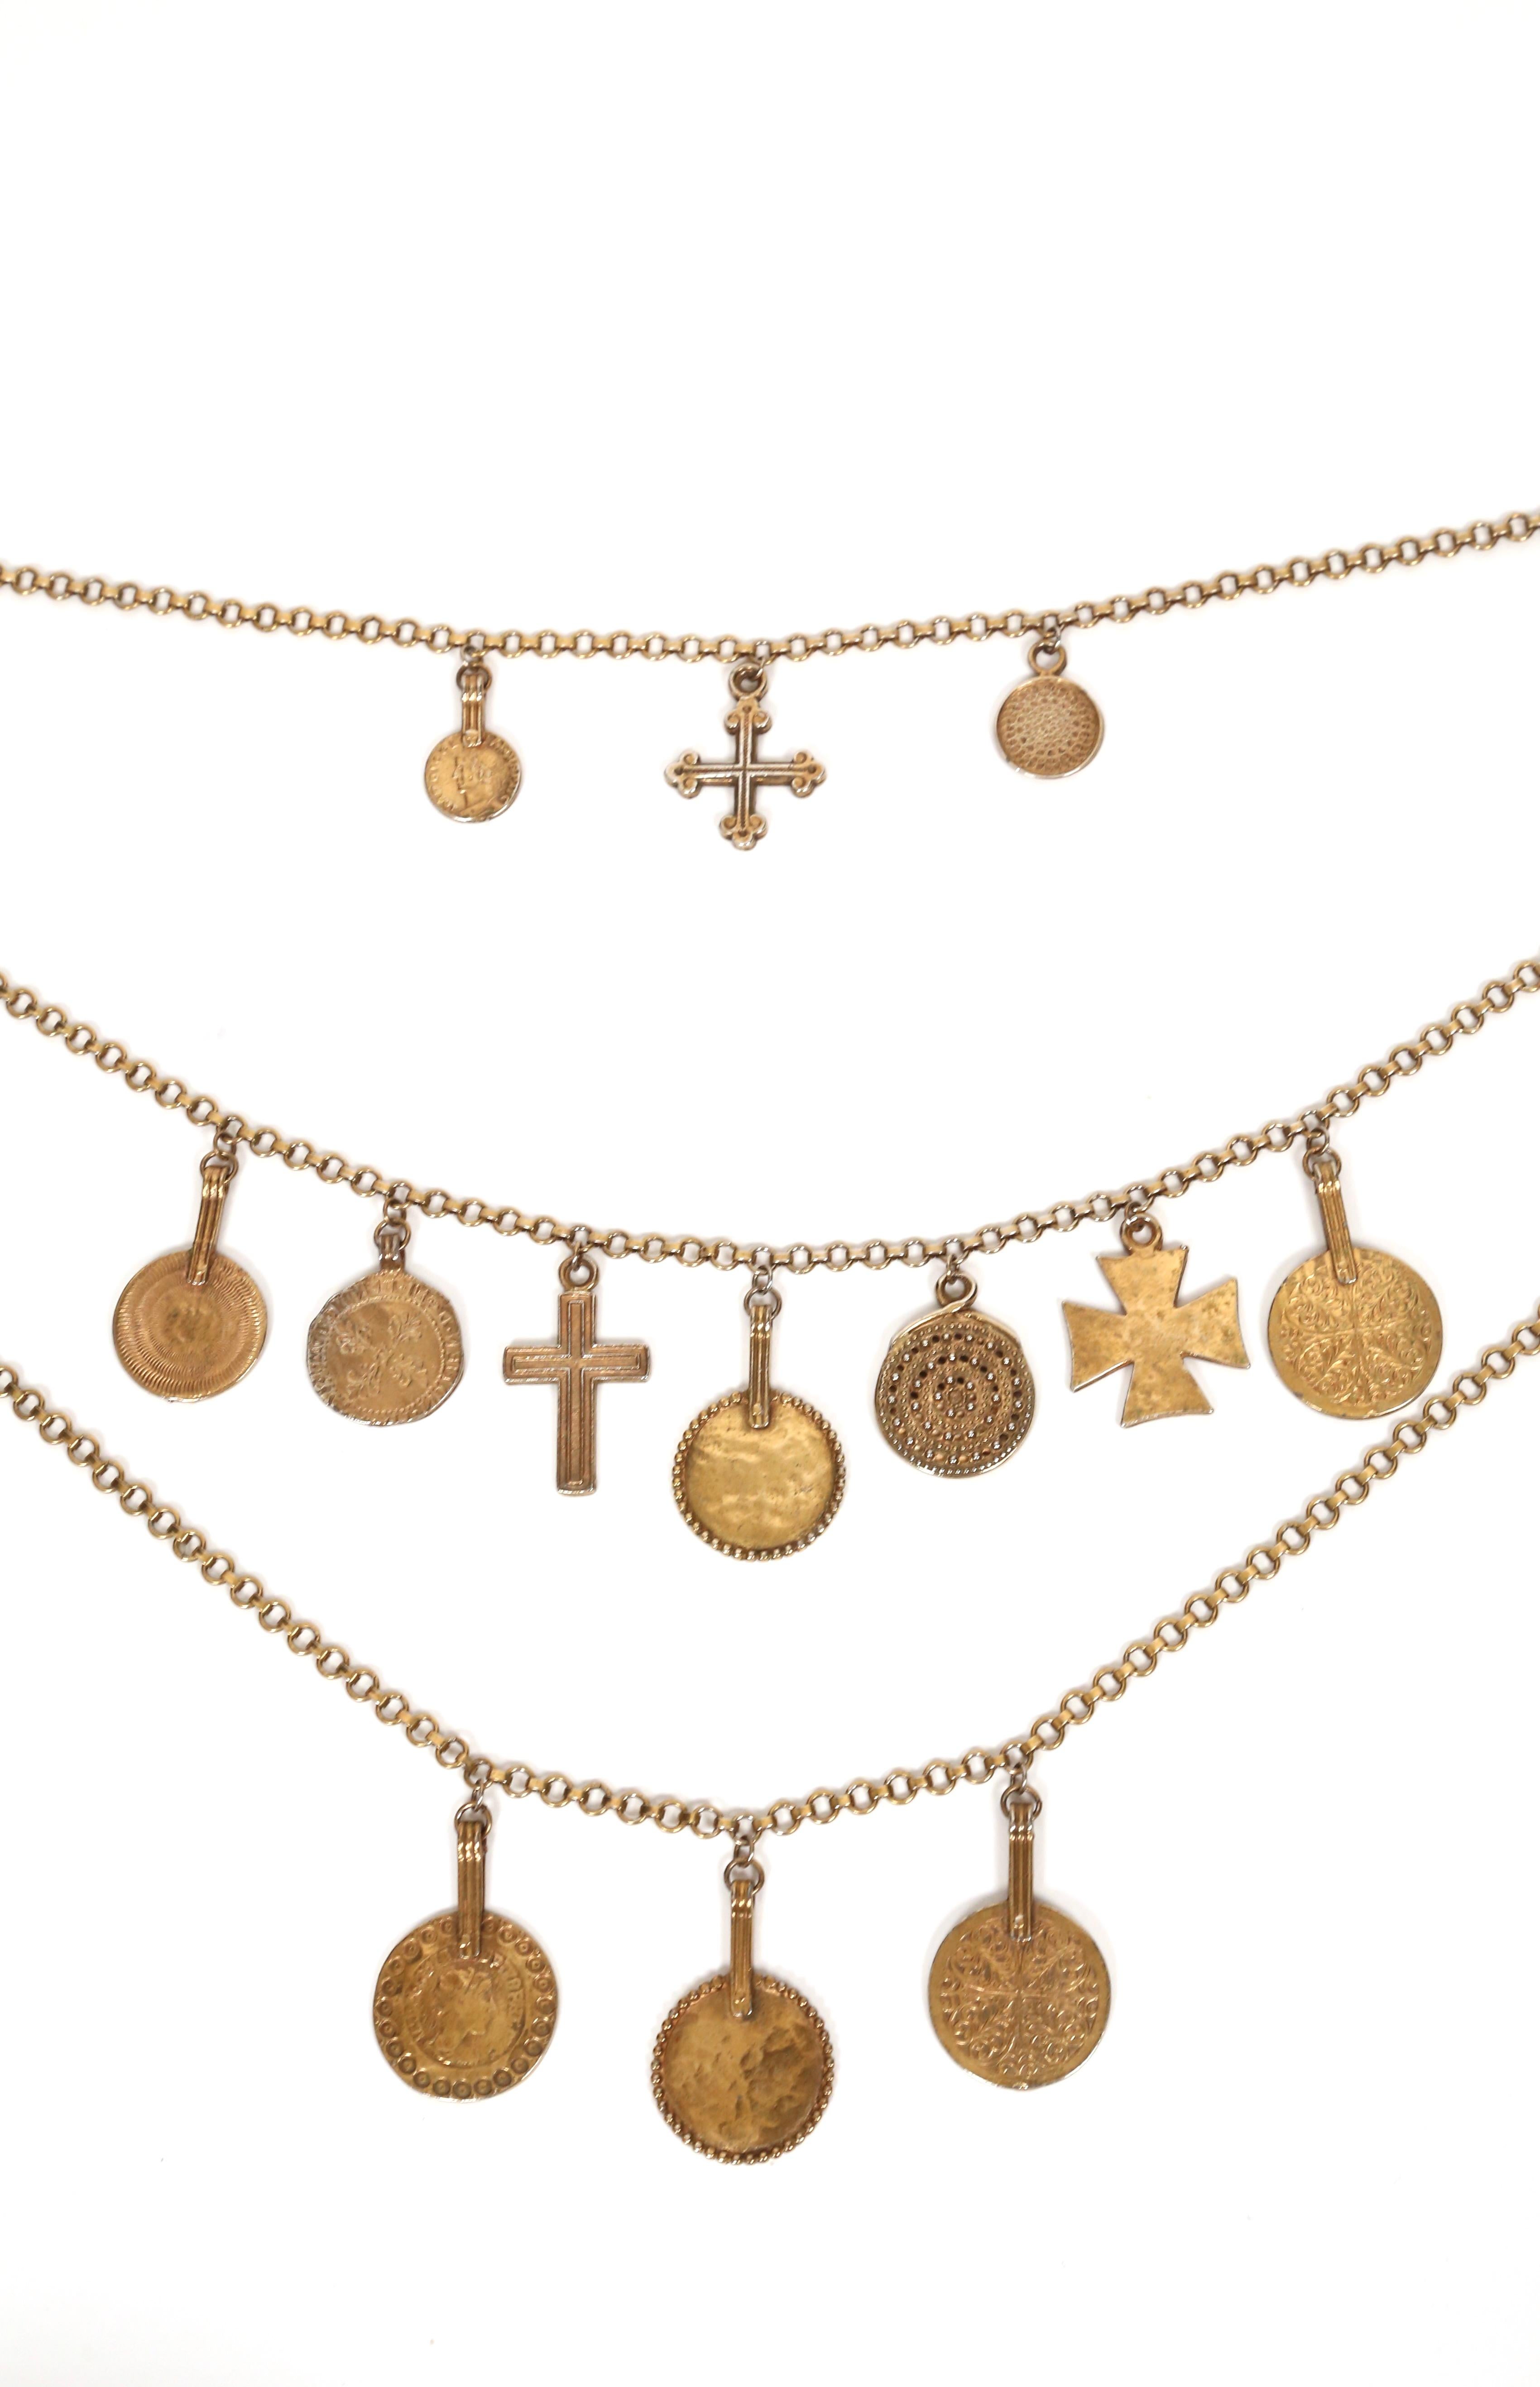 rare 1977 YVES SAINT LAURENT gilt coins and crosses charm necklace For Sale 1